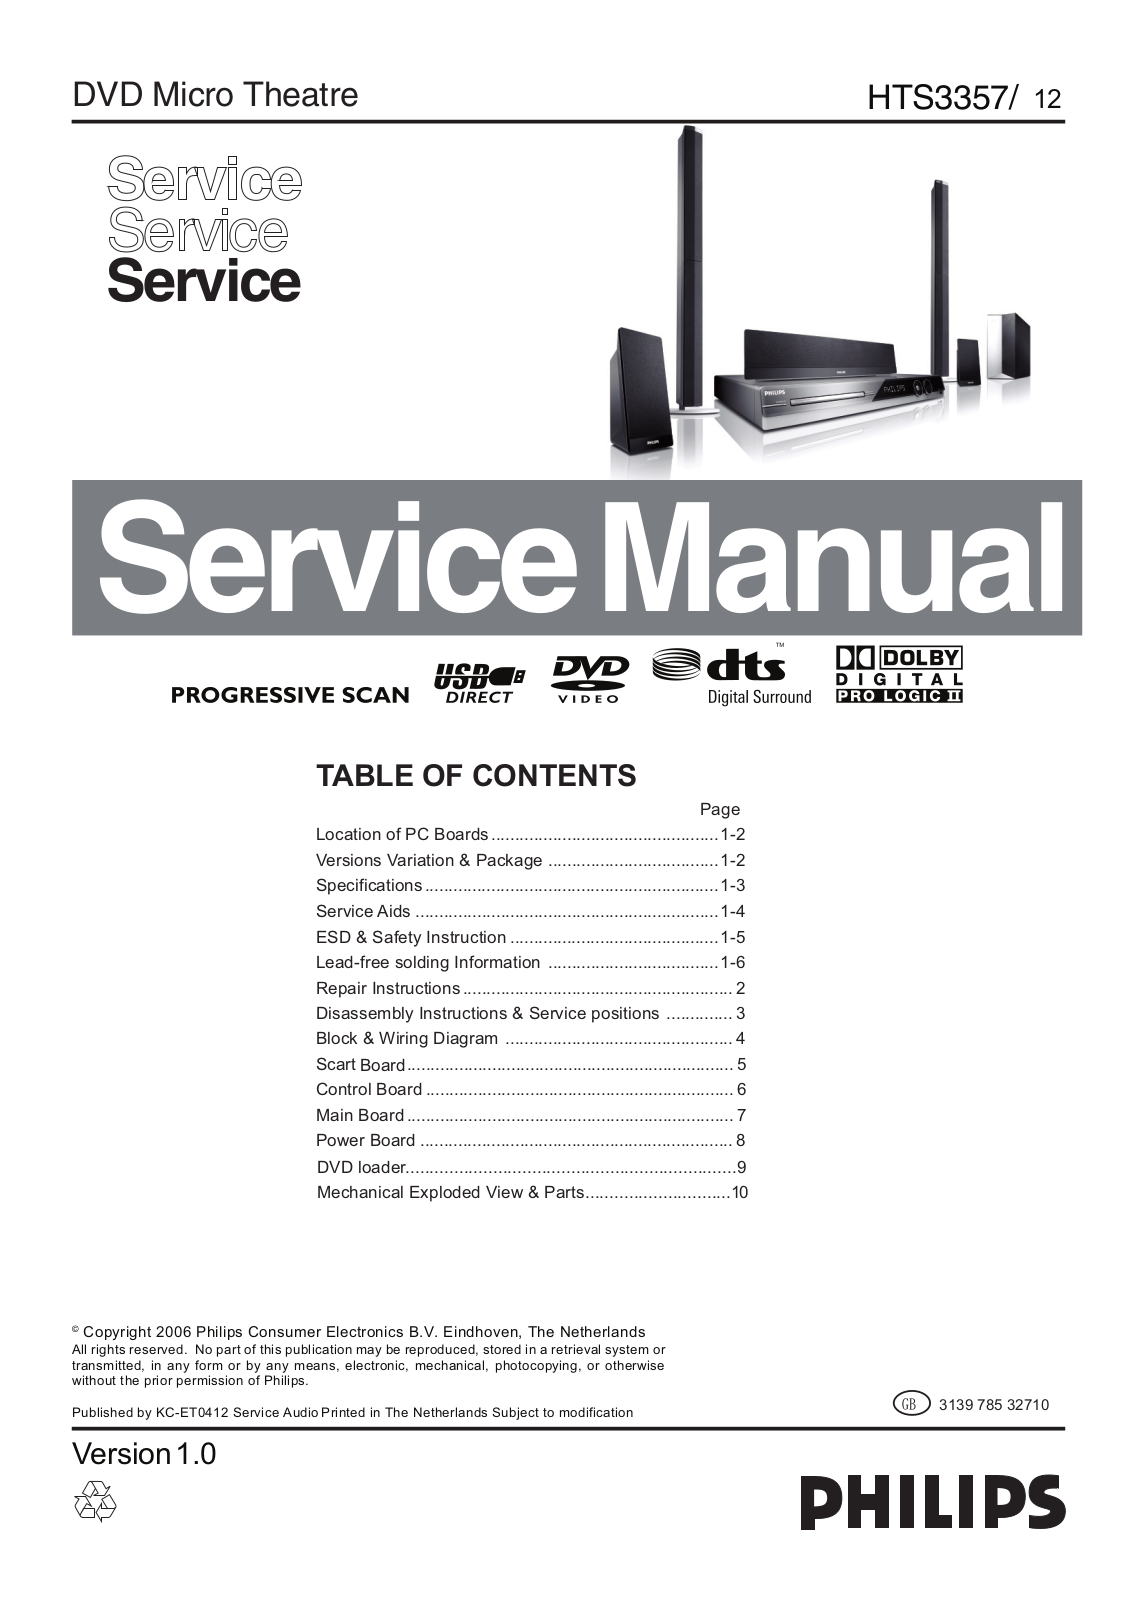 PHILIPS HTS3357- 12 Service Manual